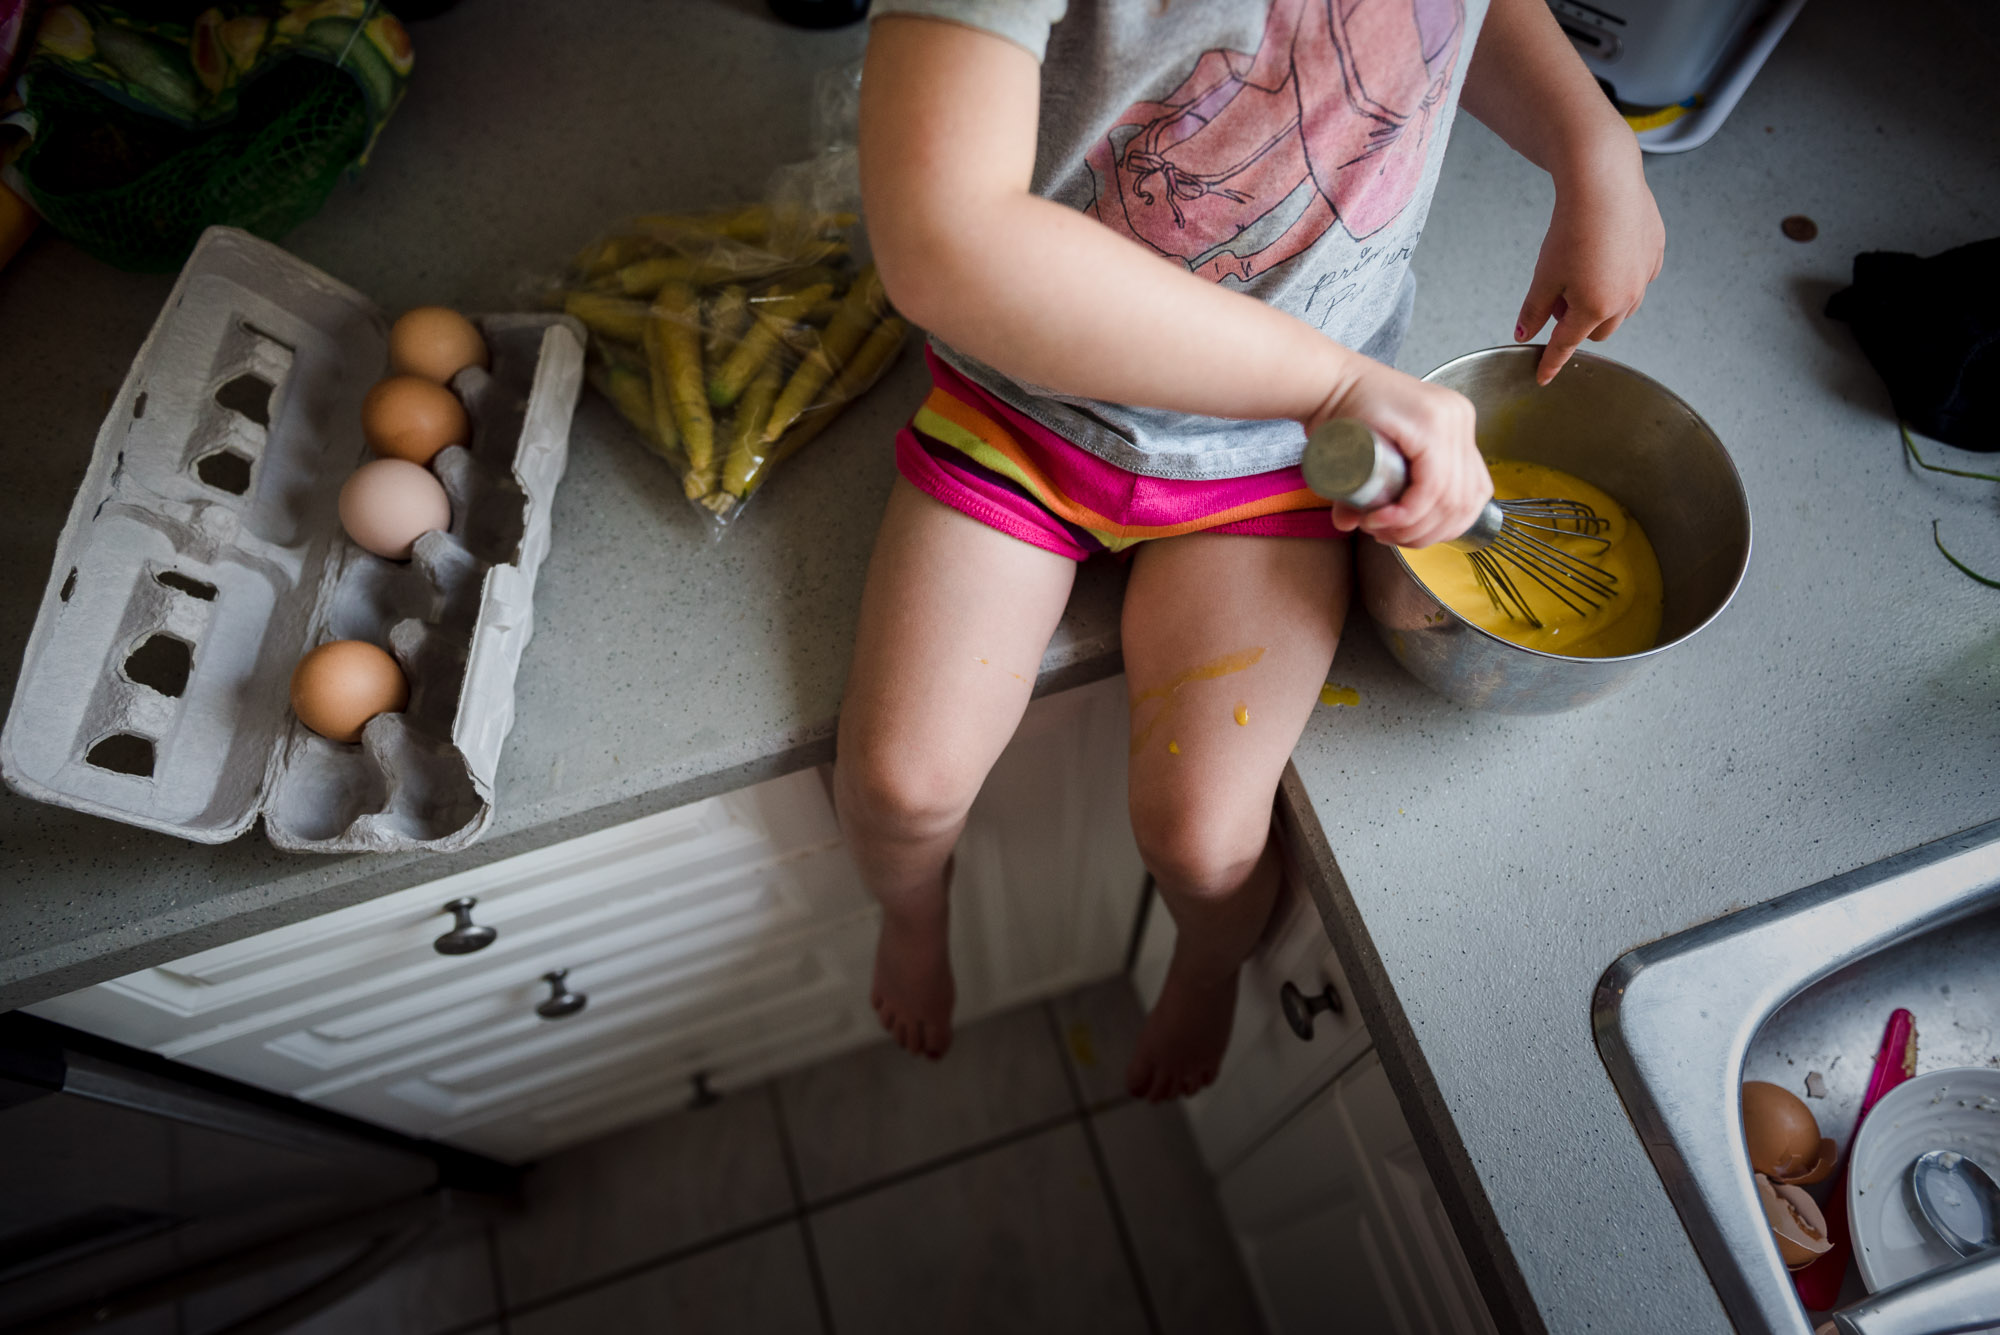 A little girl makes scrambled eggs while sitting on a countertop